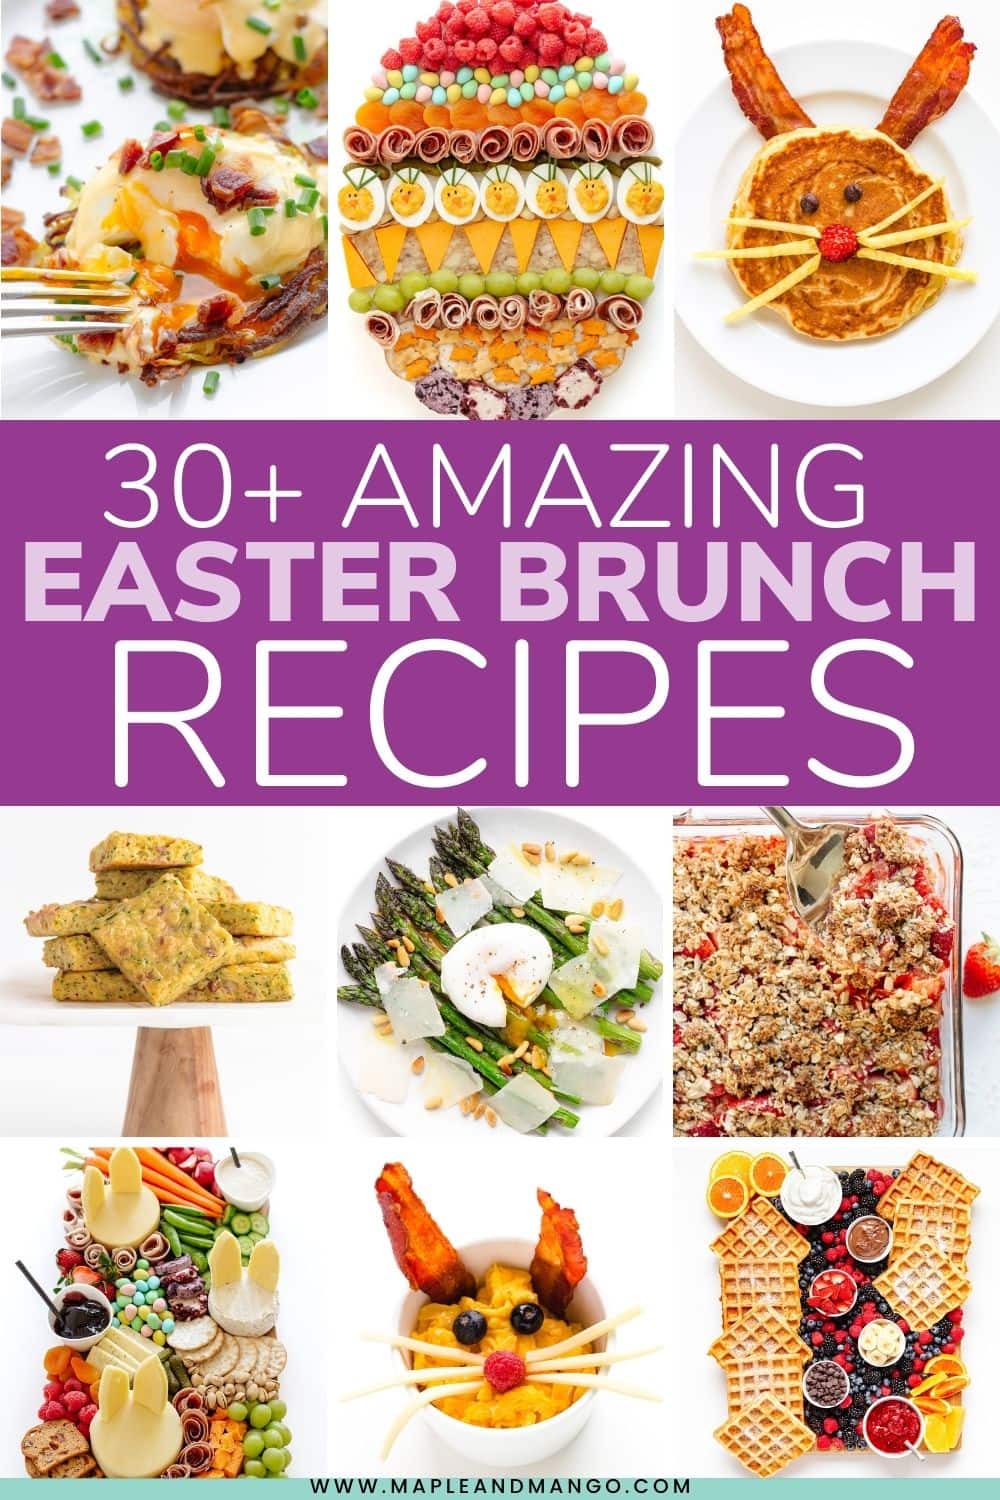 Pinterest photo collage graphic for 30+ Amazing Easter Brunch Recipes.